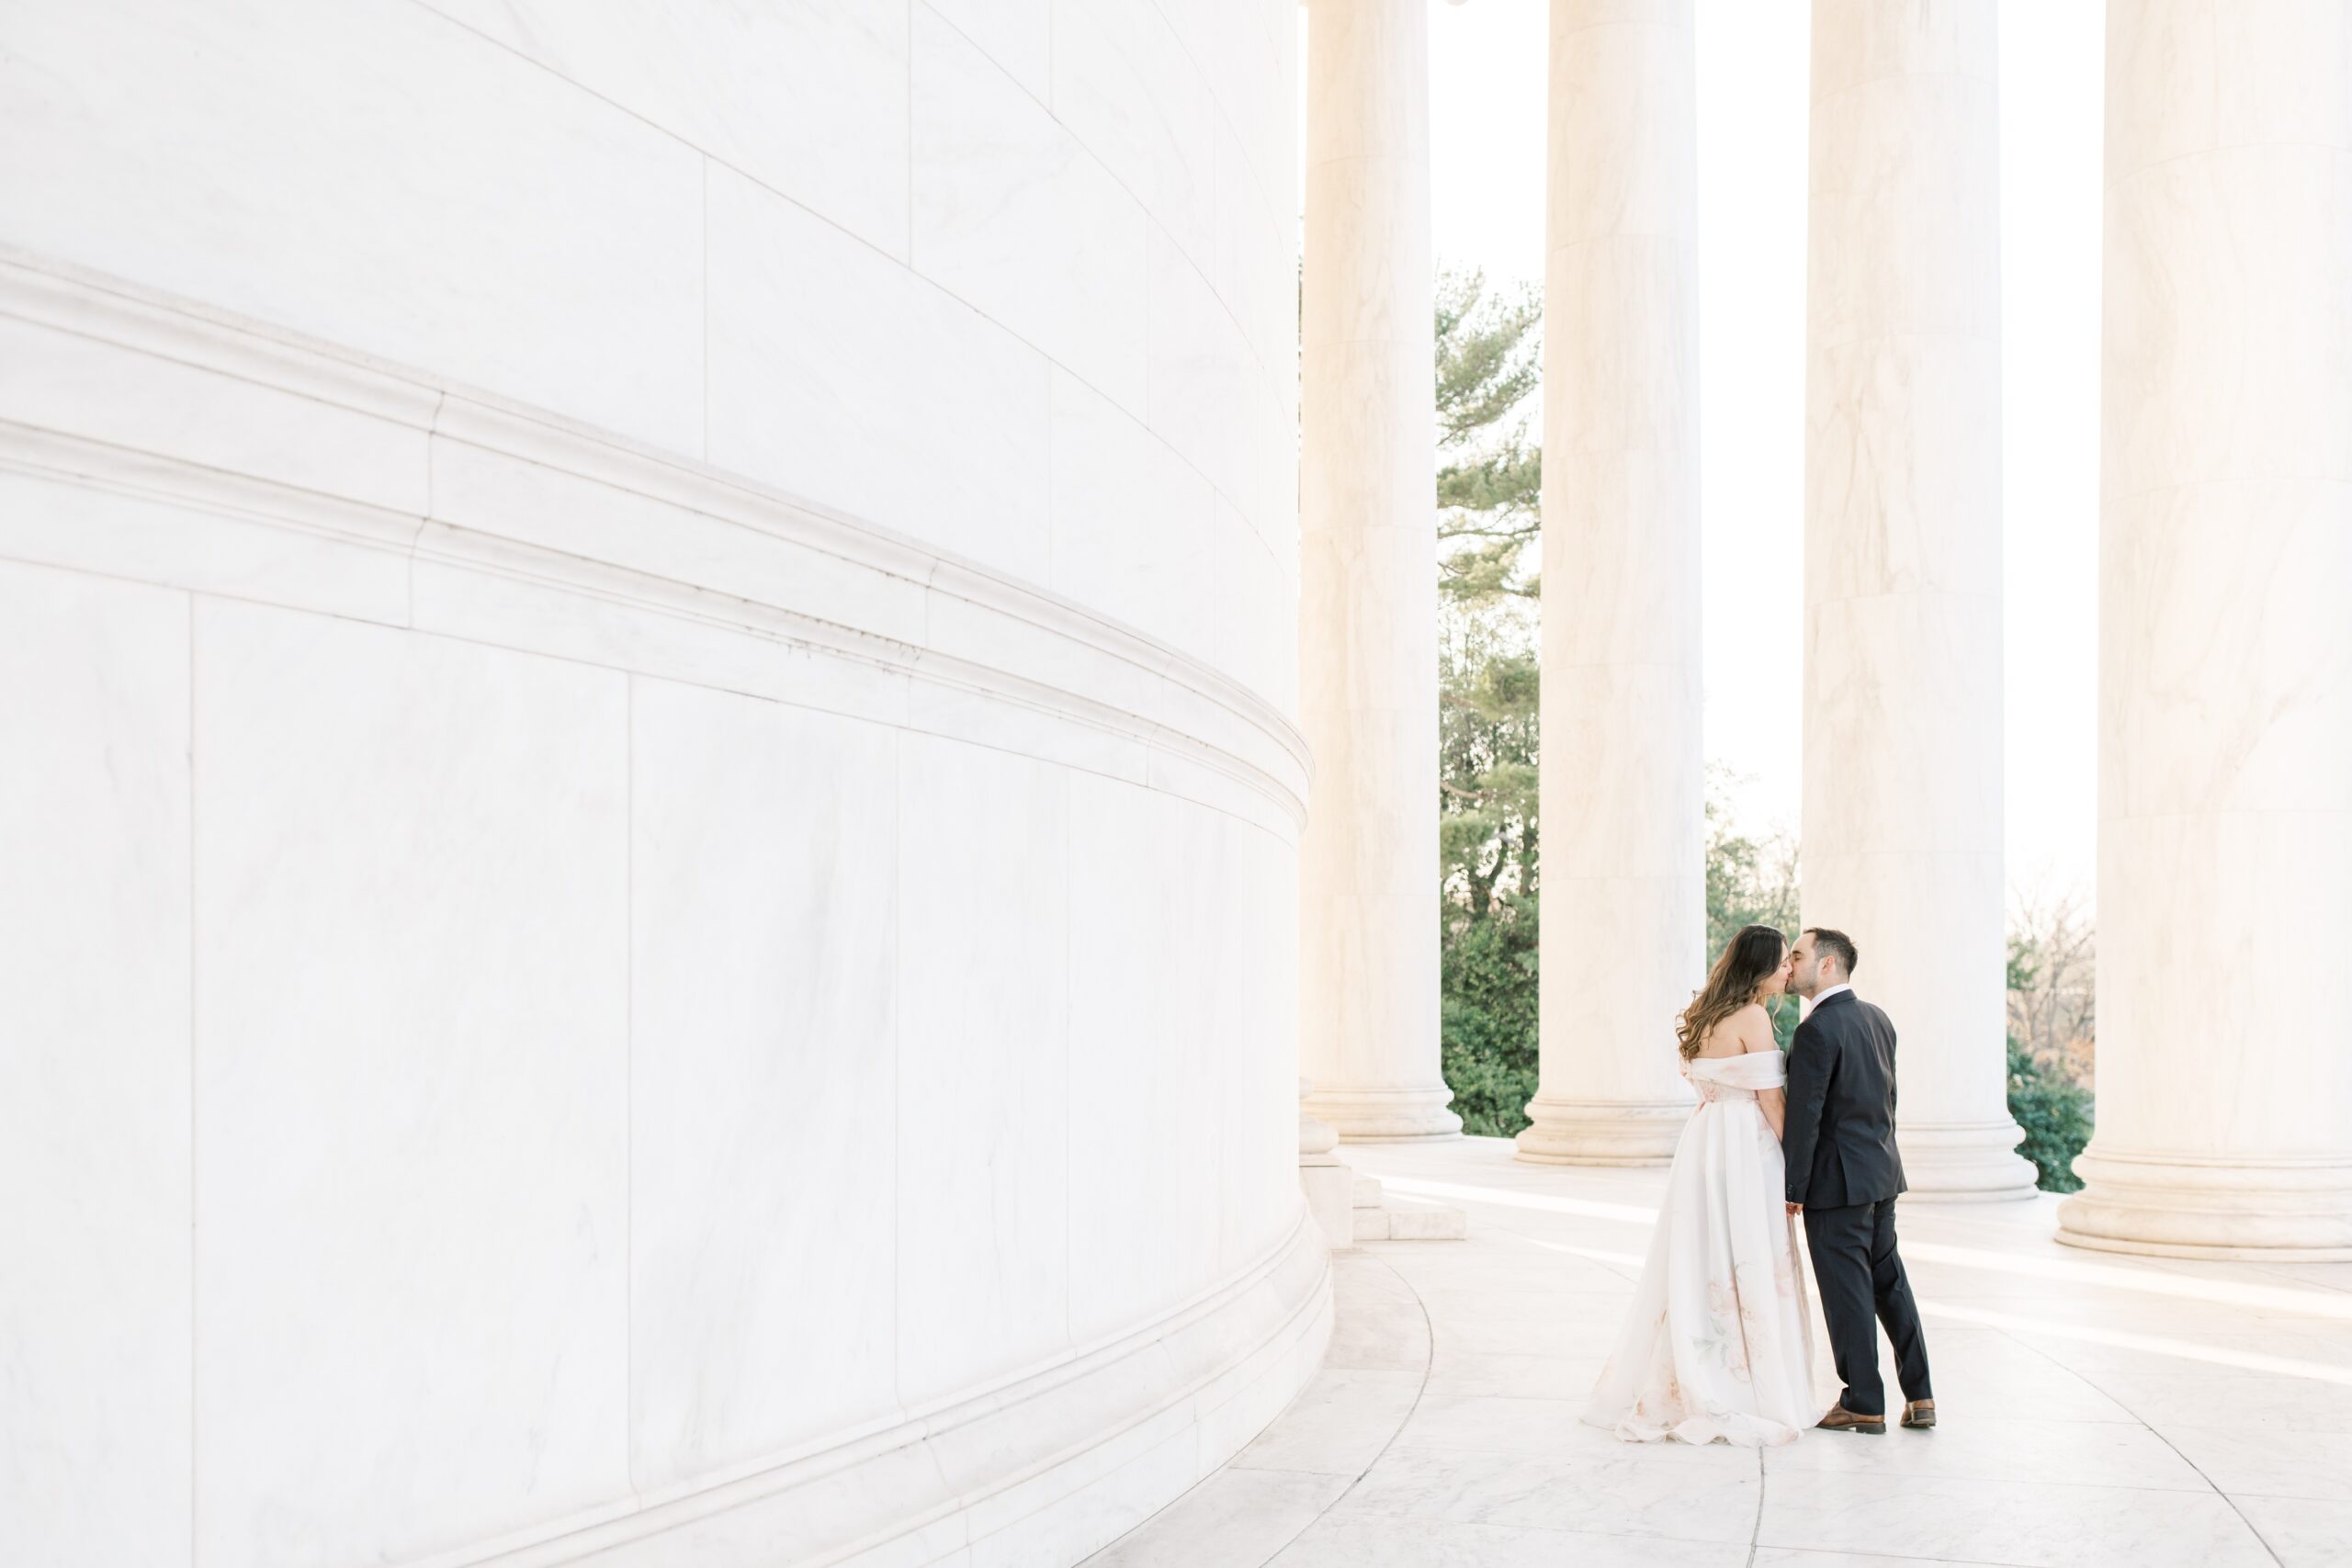 Spring engagement portraits at the Jefferson Memorial in Washington, DC. Includes a few photos amongst the iconic Cherry Blossoms!